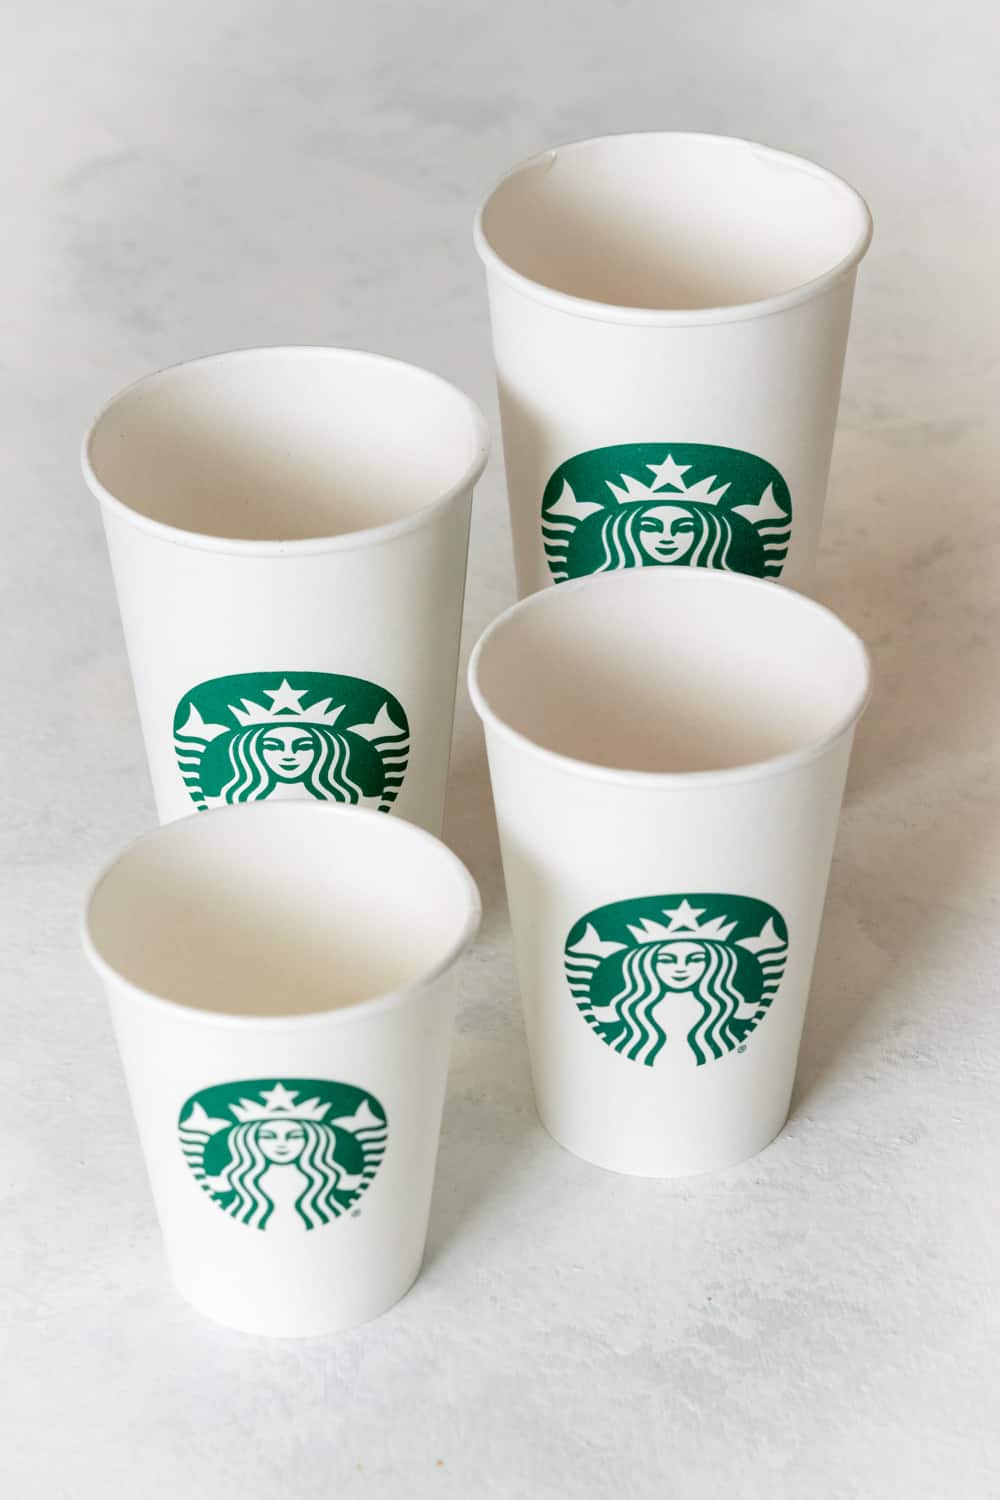 Starbucks Drink Sizes The Ultimate Guide Grounds To Brew